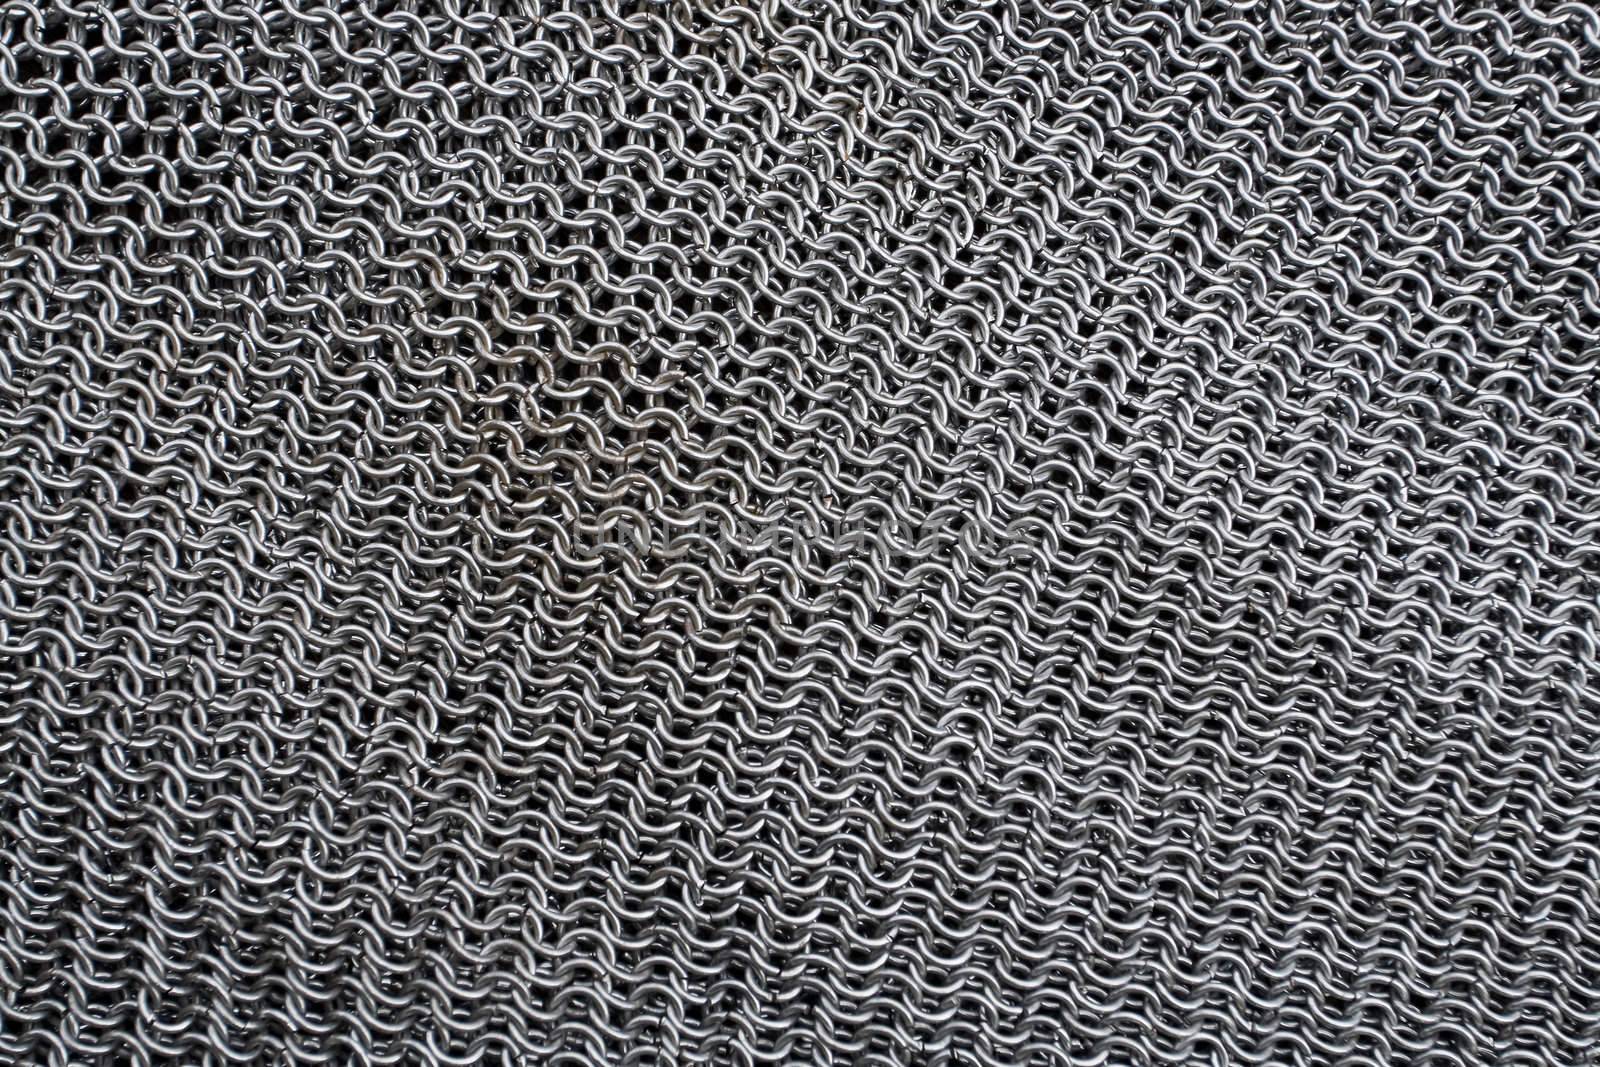 Background of medieval armour made from metal rings